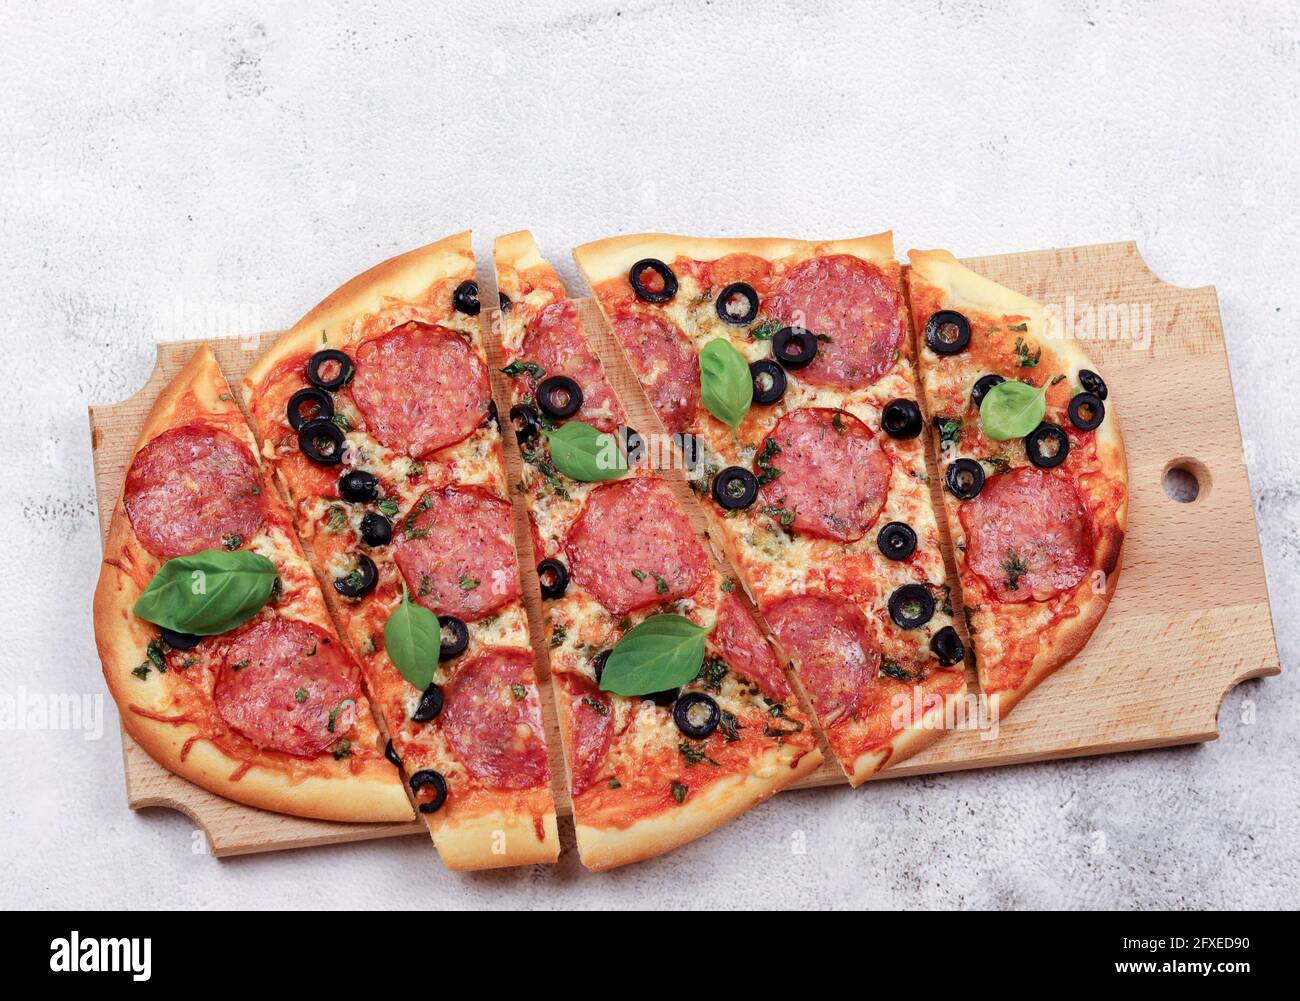 Sliced roman square pizza with cheese, sausage, olives and tomatoes on a round wooden cutting board on a light gray background. Top view, flat lay Stock Photo